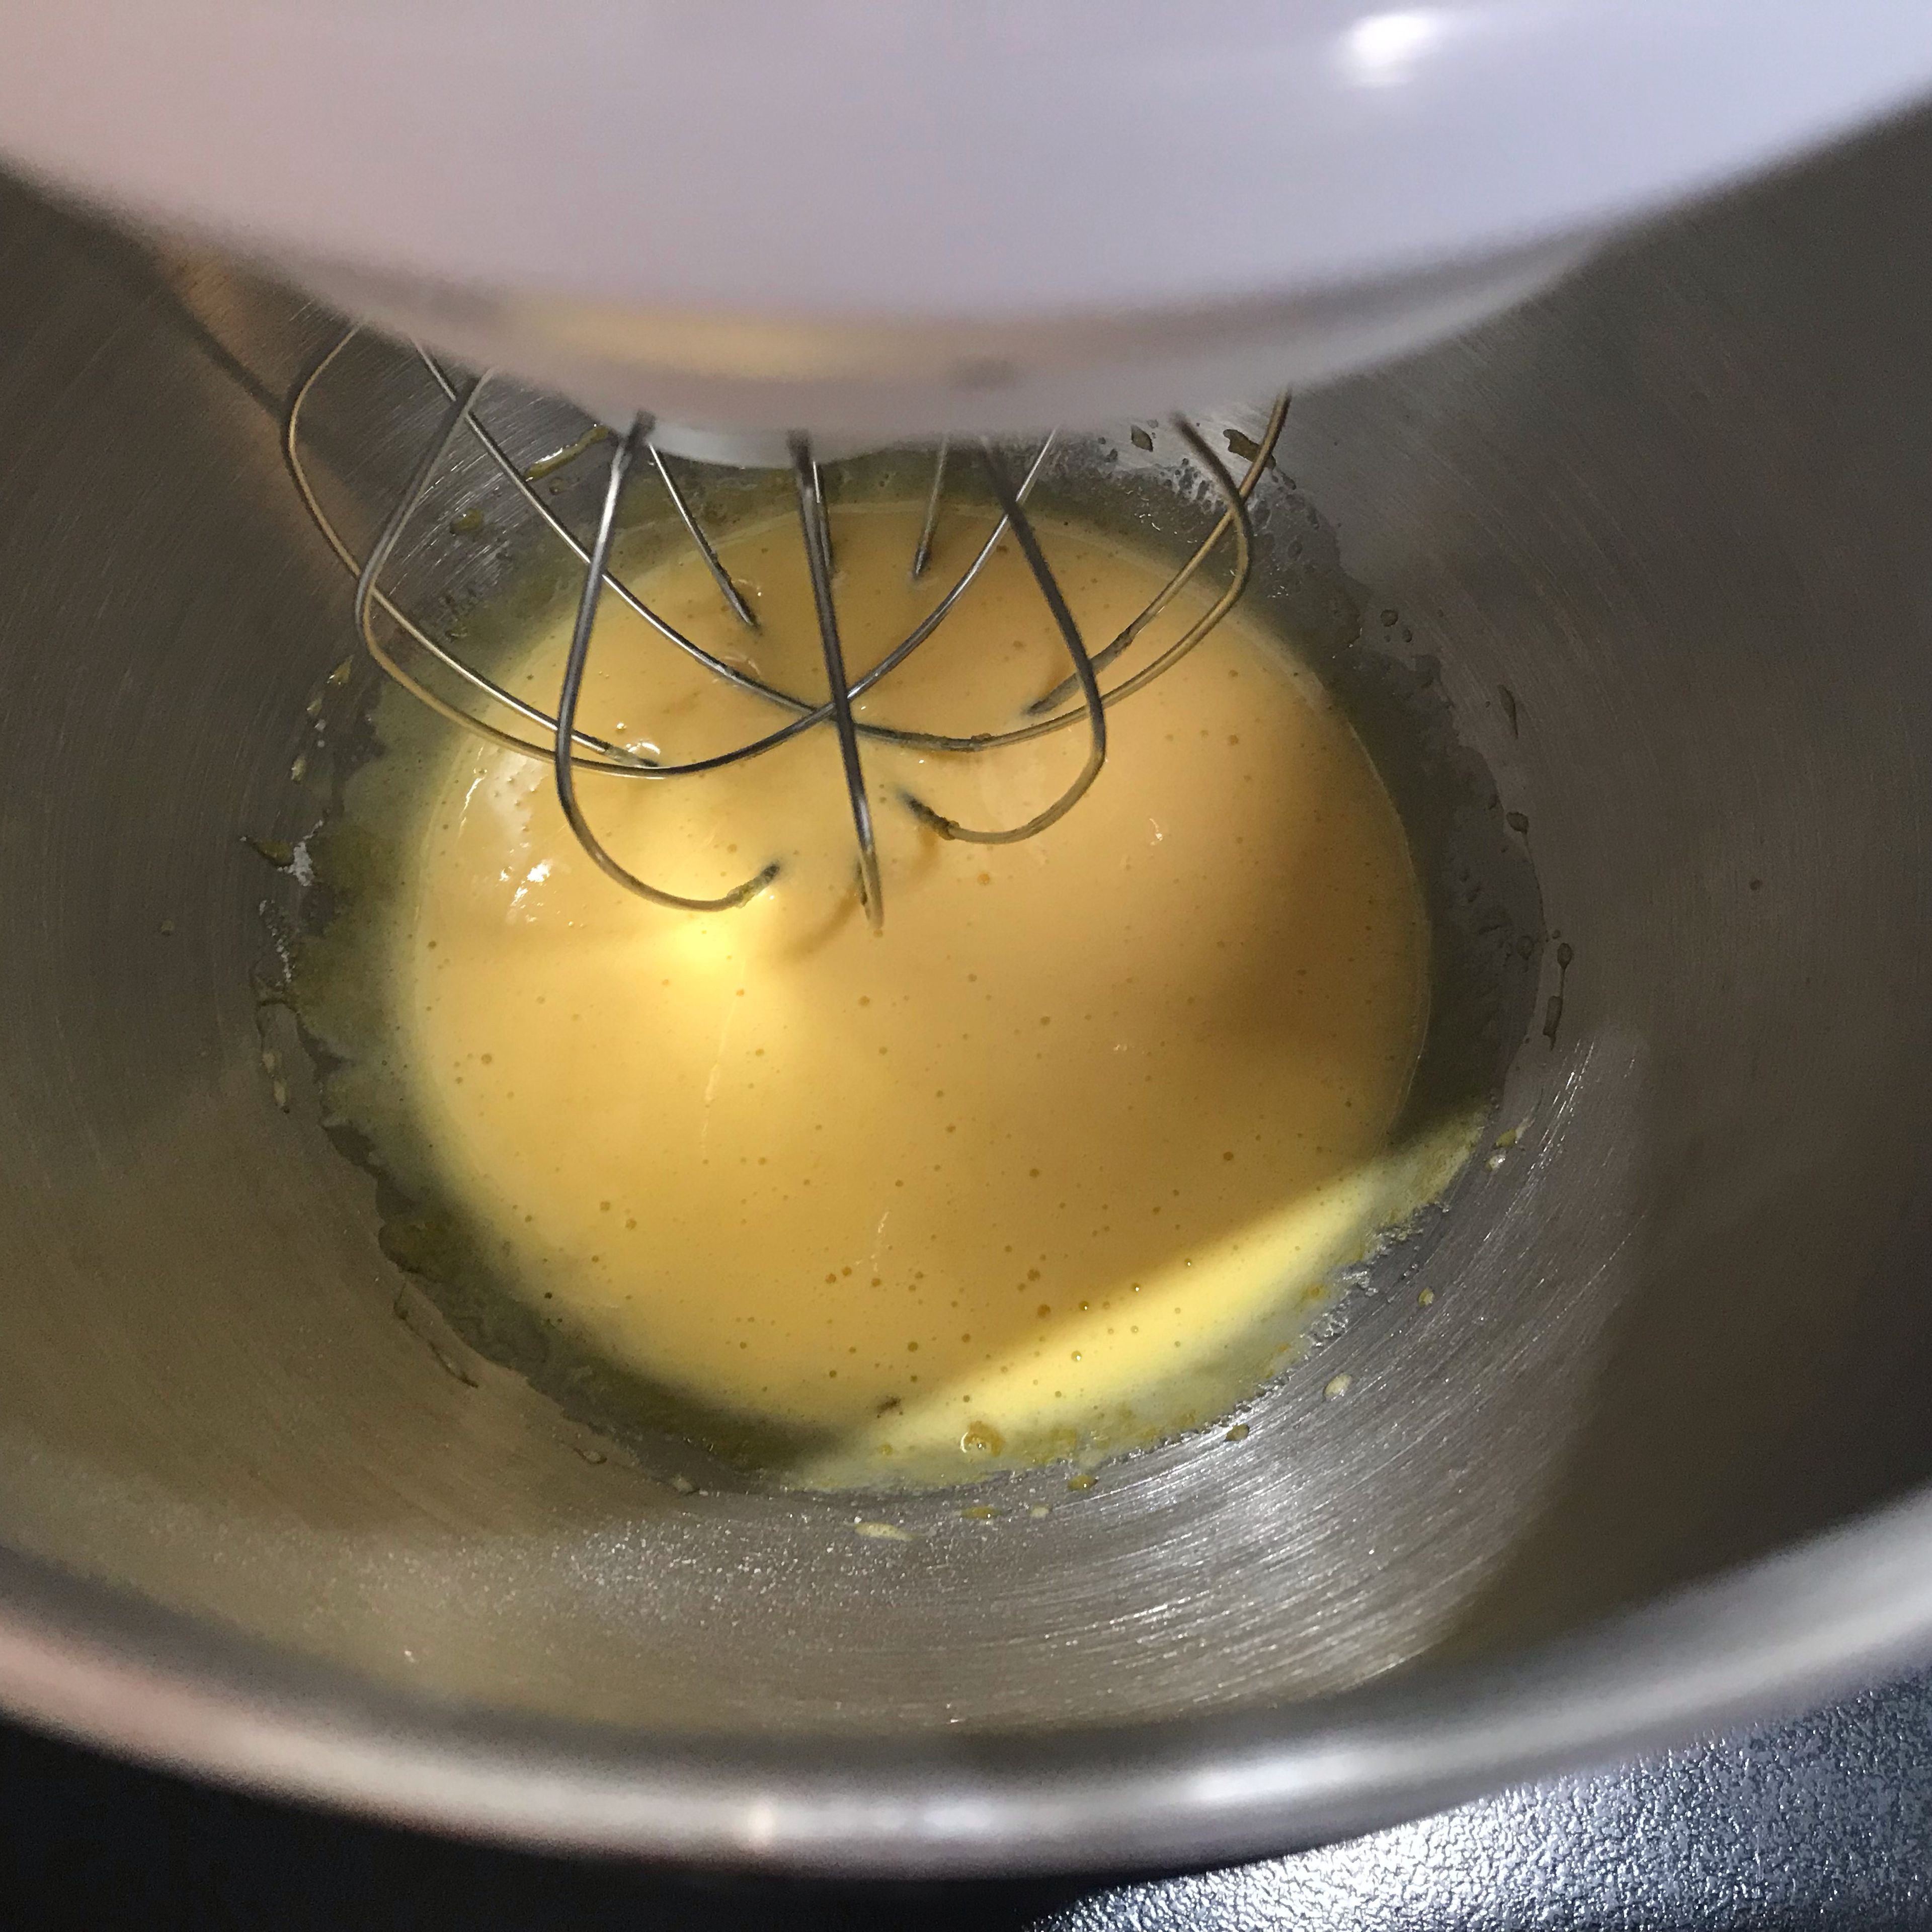 For the Pistachio Mousse, place egg yolks and sugar into the bowl of a stand mixer and whisk until pale and thick.